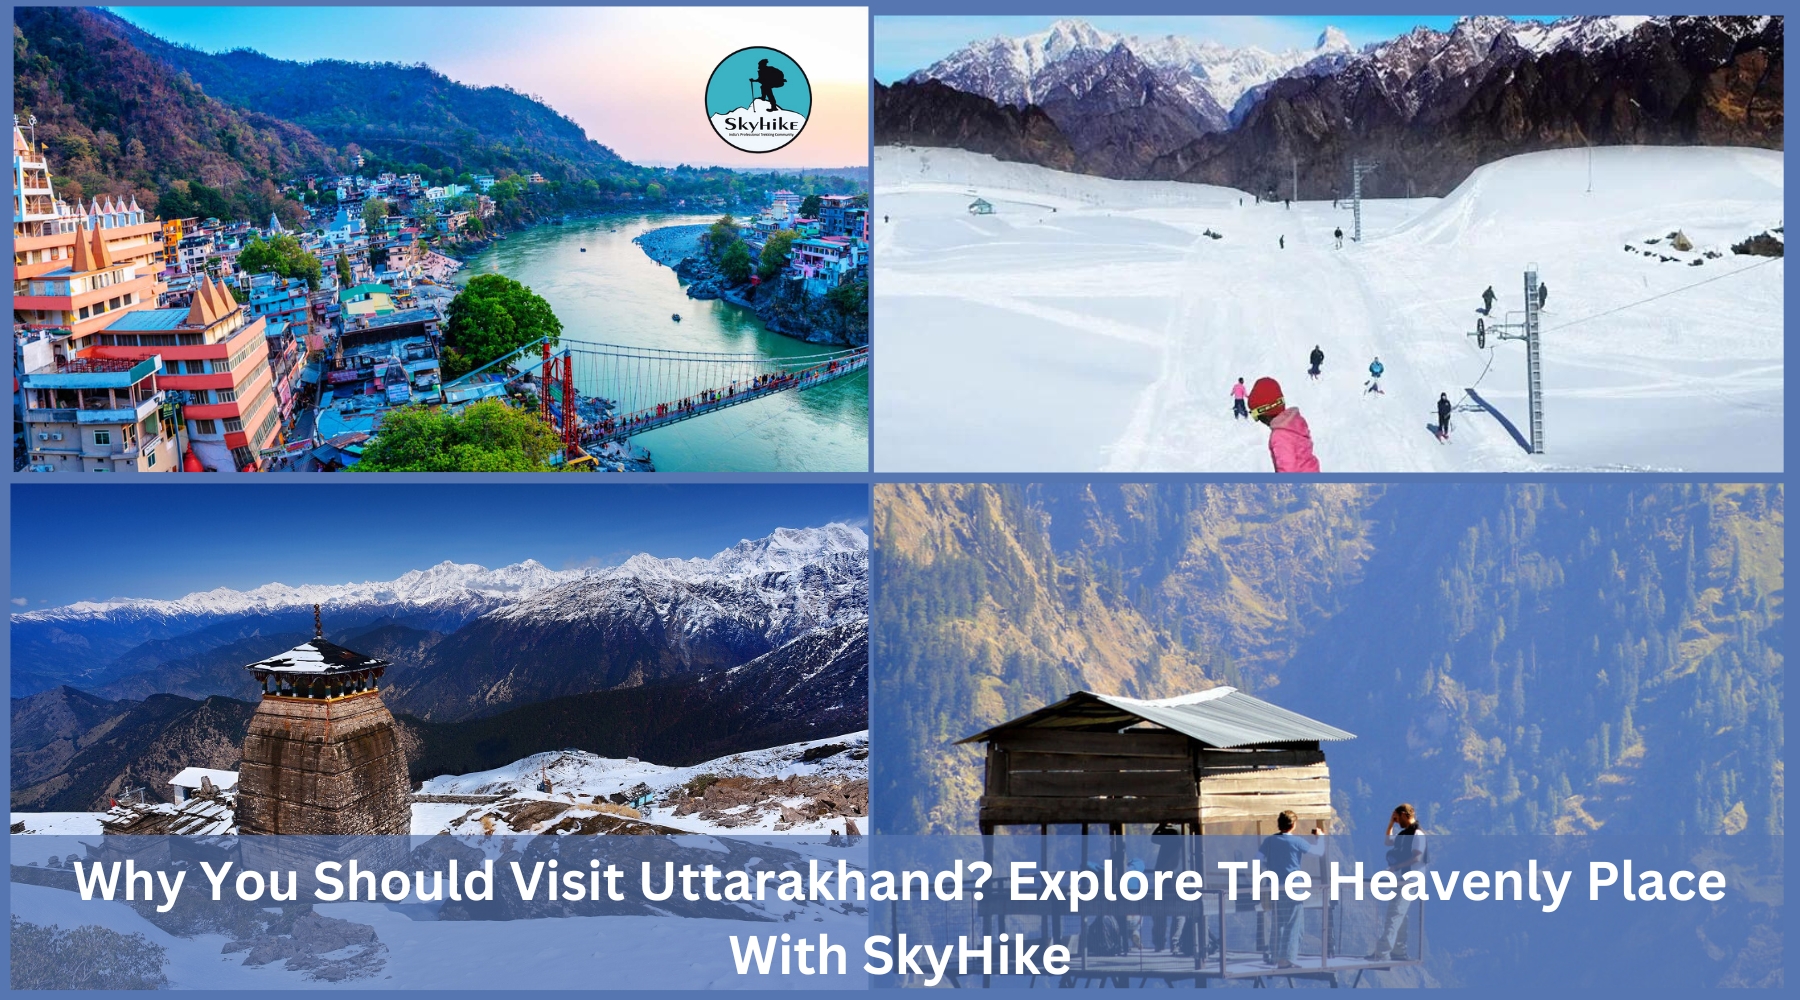 Why You Should Visit Uttarakhand Explore The Heavenly Place With SkyHike